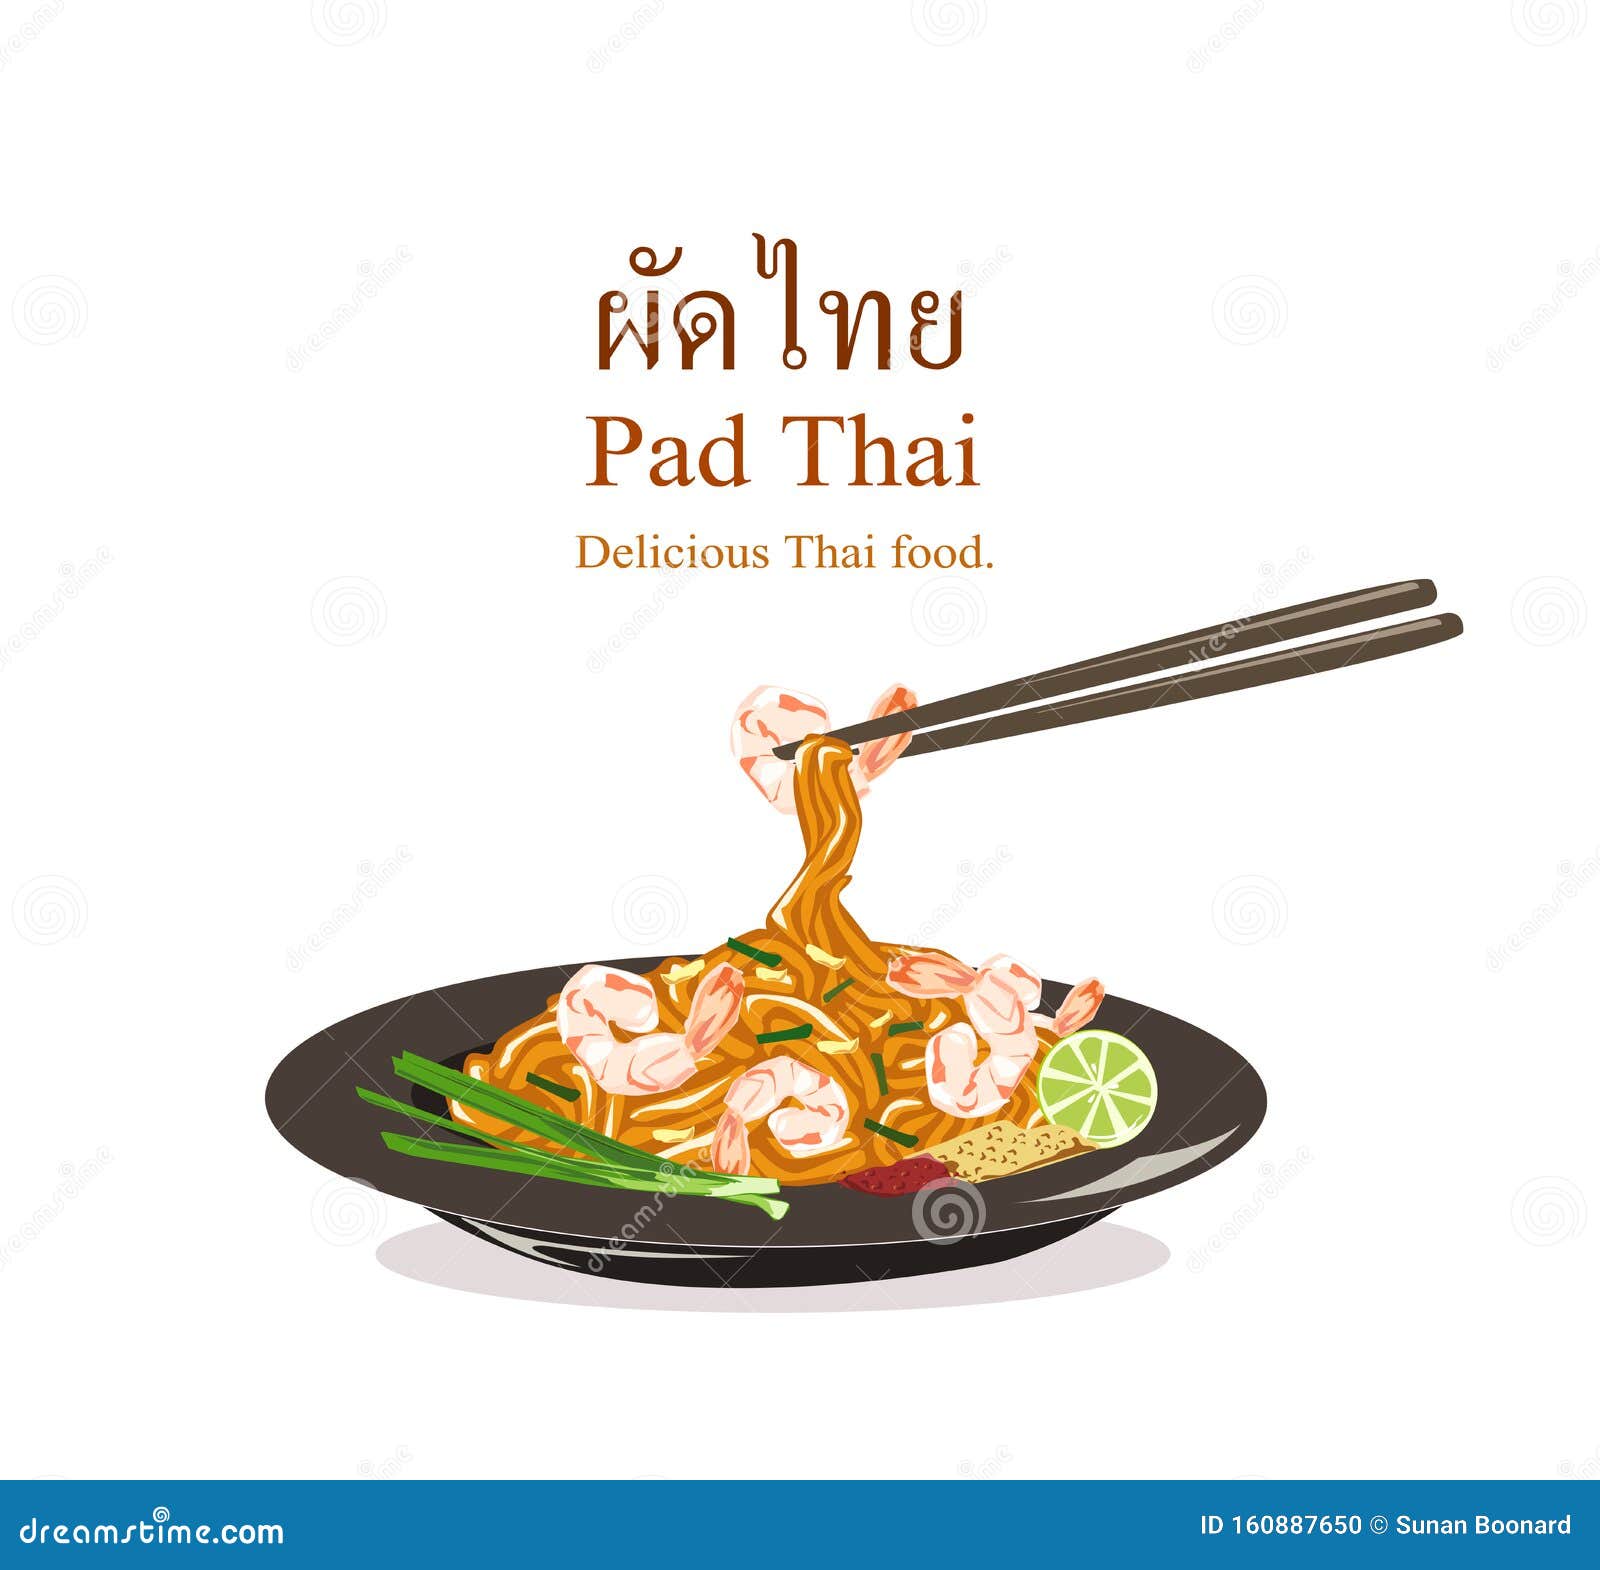 thai food pad thai , stir fries noodles with shrimp in padthai style isolate on white background.